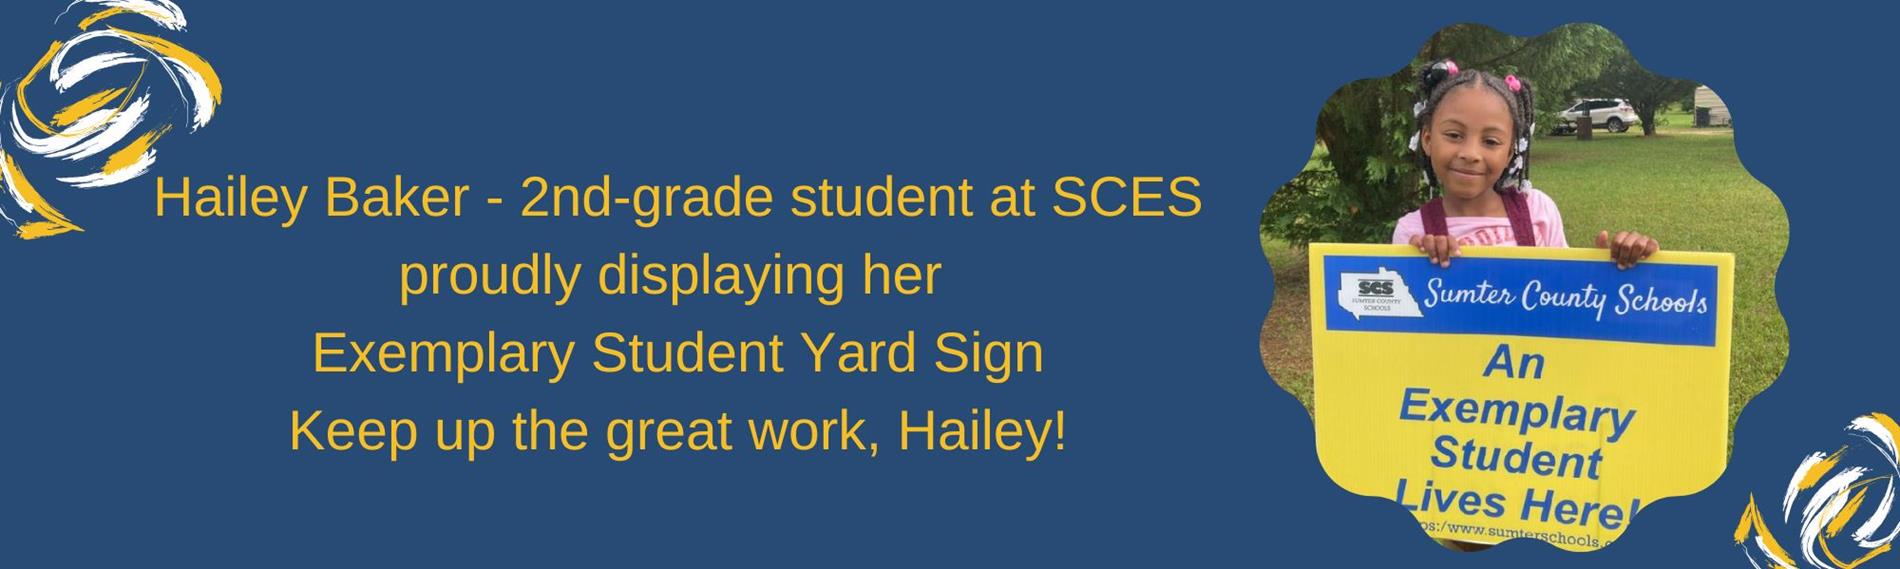 Hailey Baker - displaying her  Exemplary Student Yard Sign